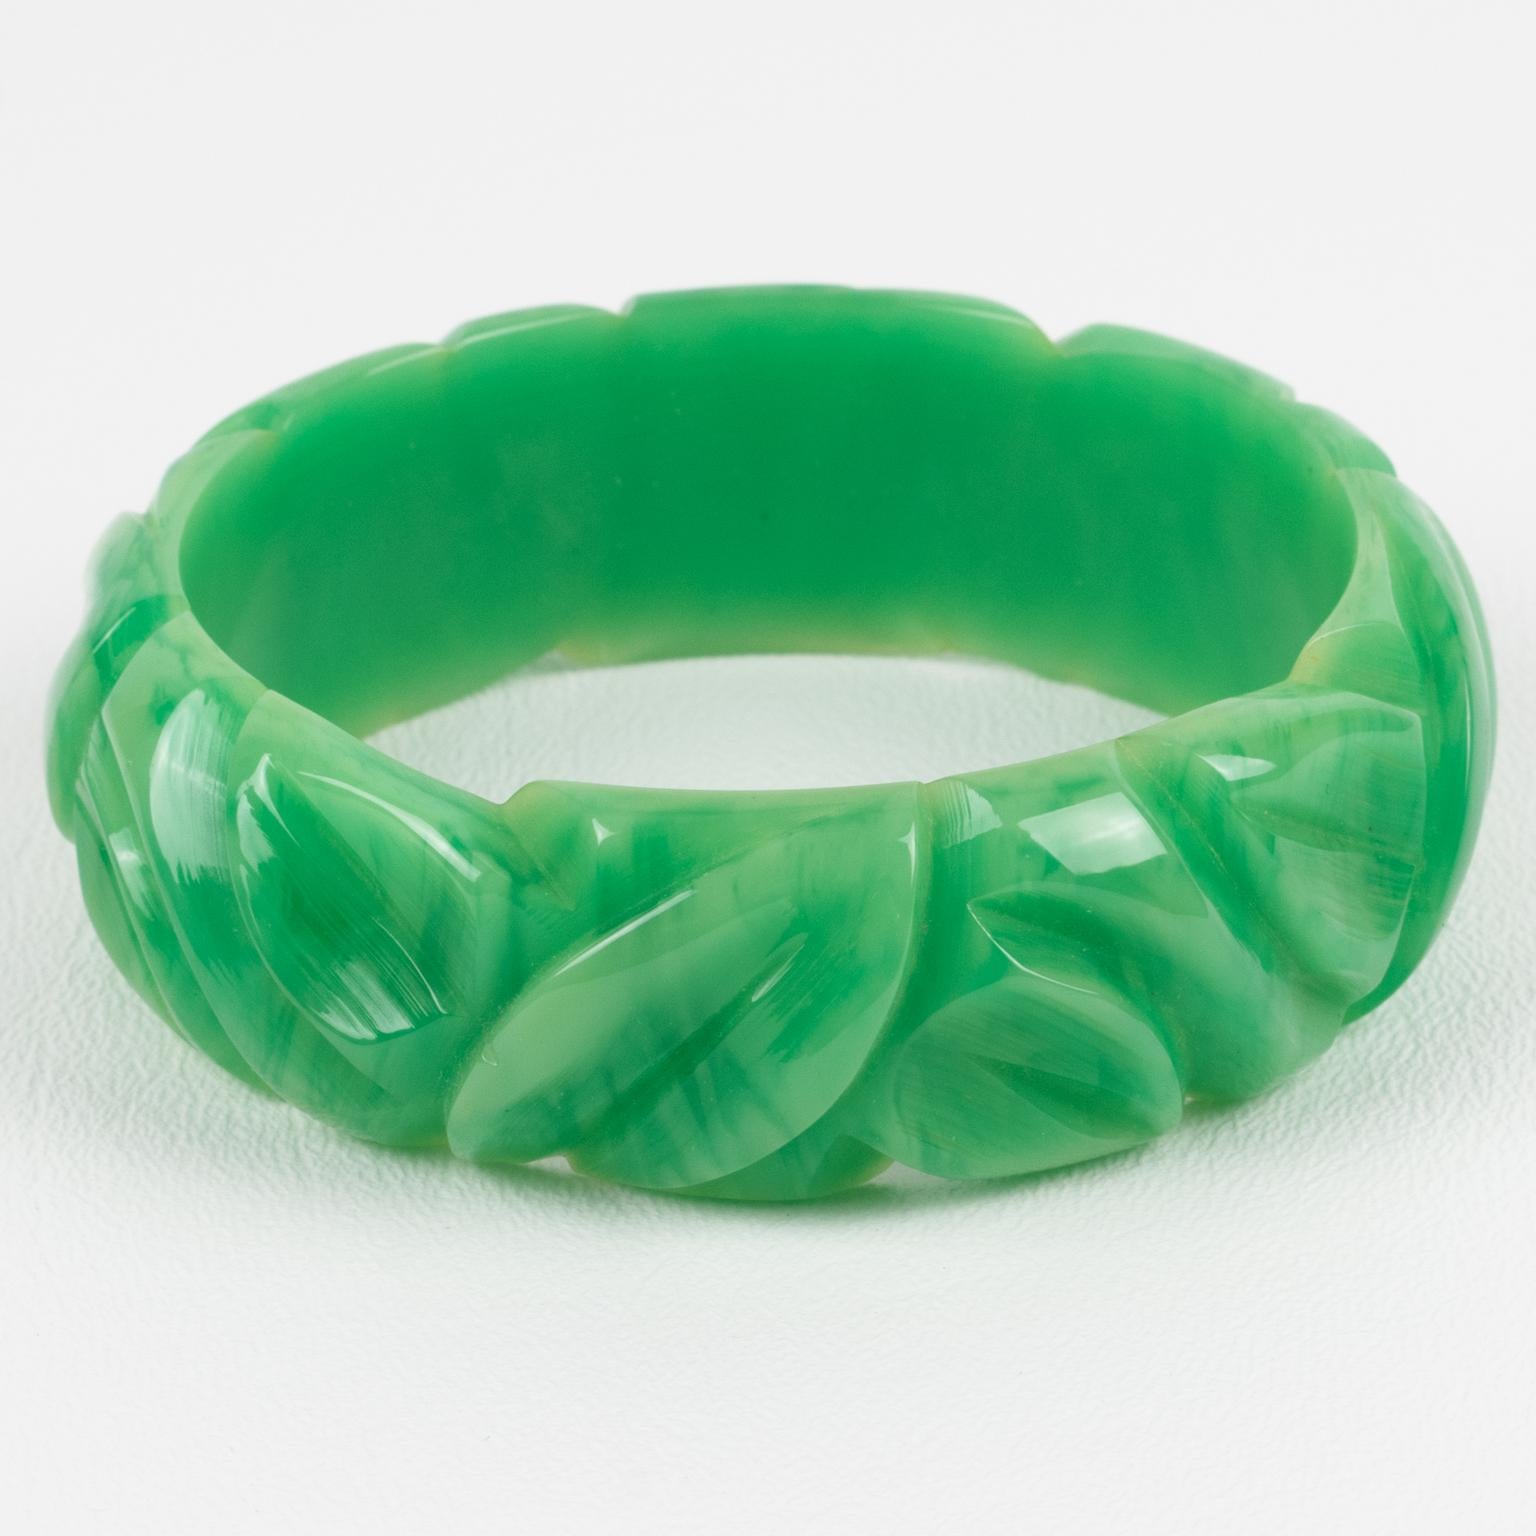 This is a gorgeous milky turquoise marble Bakelite carved bracelet bangle. It features a chunky domed shape with deep geometric carving all around. The color is an intense green marble tone with milky cloudy swirling.
Measurements: Inside across is